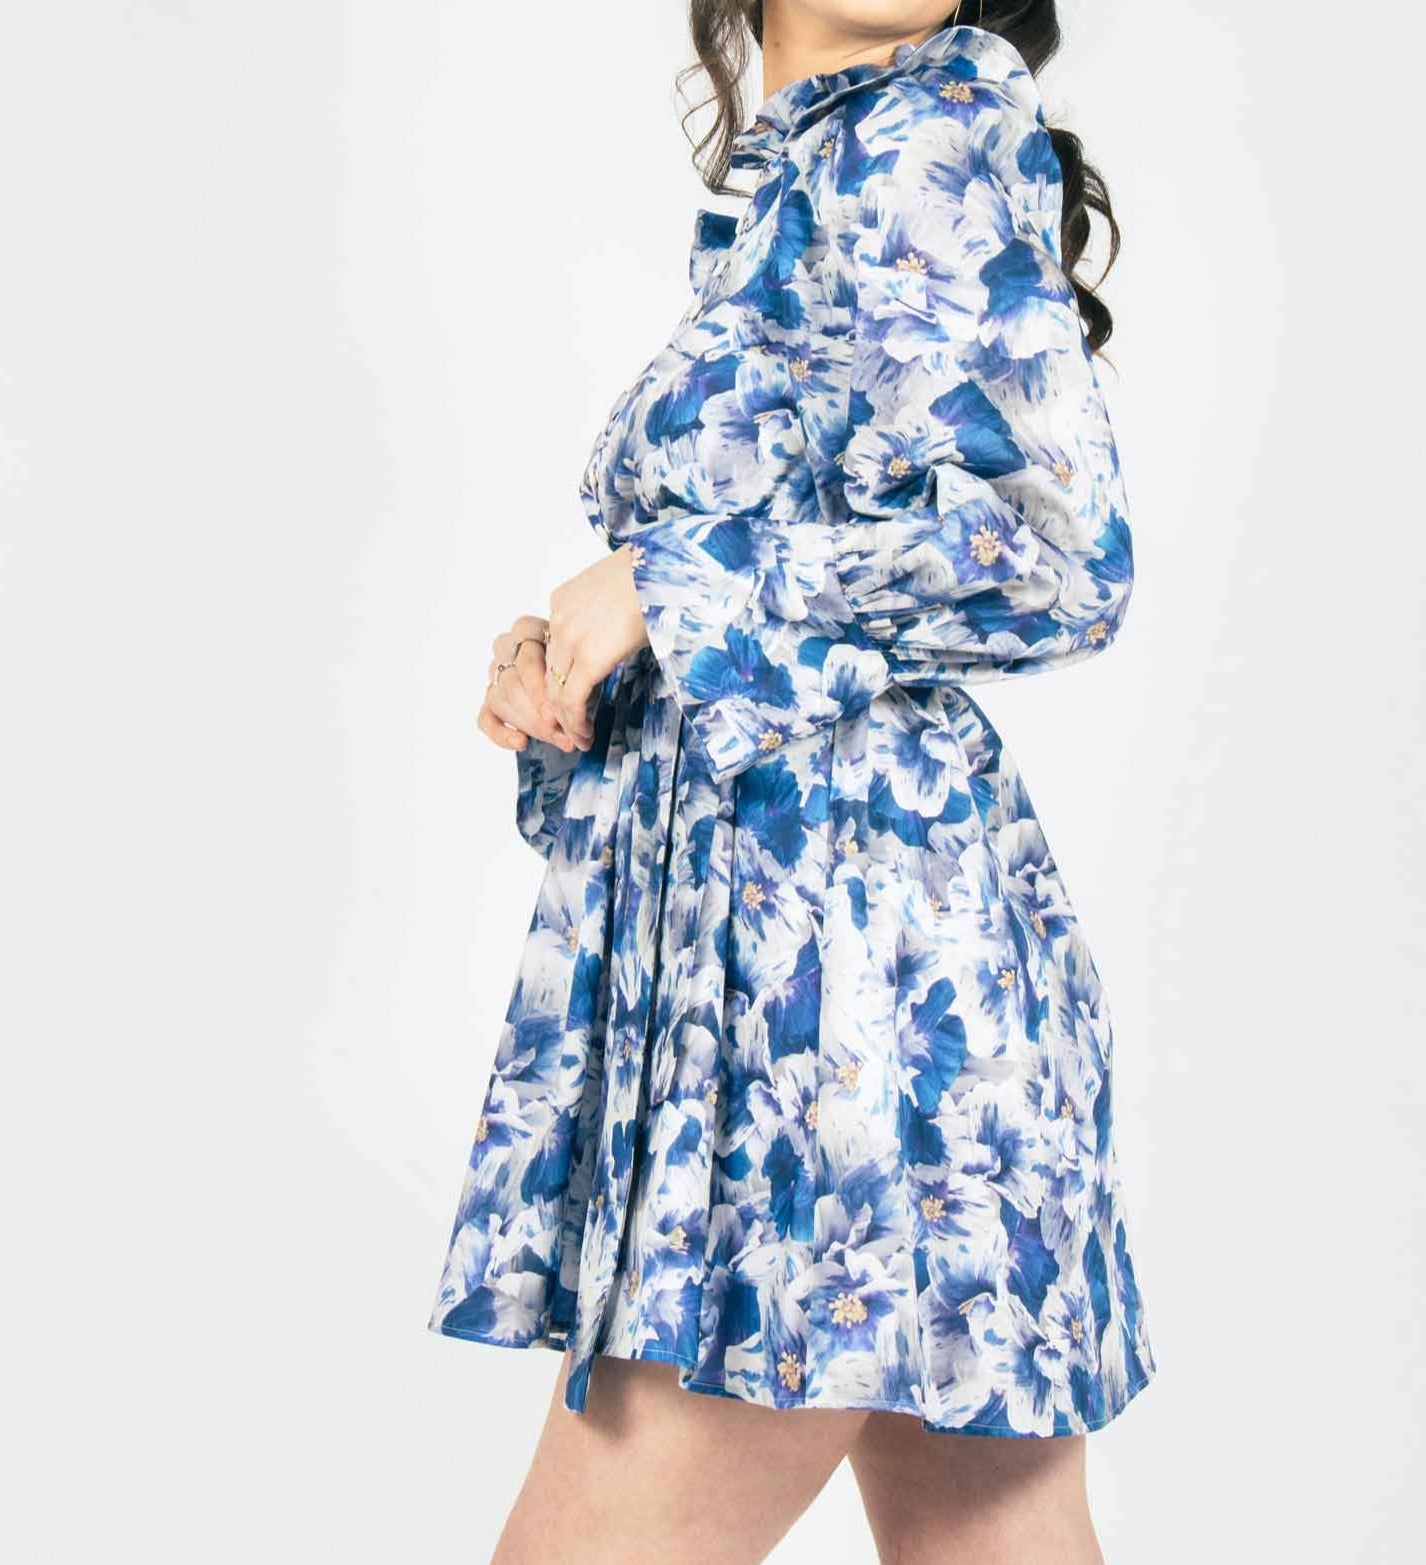 girly and flirty mini dress with large floral print